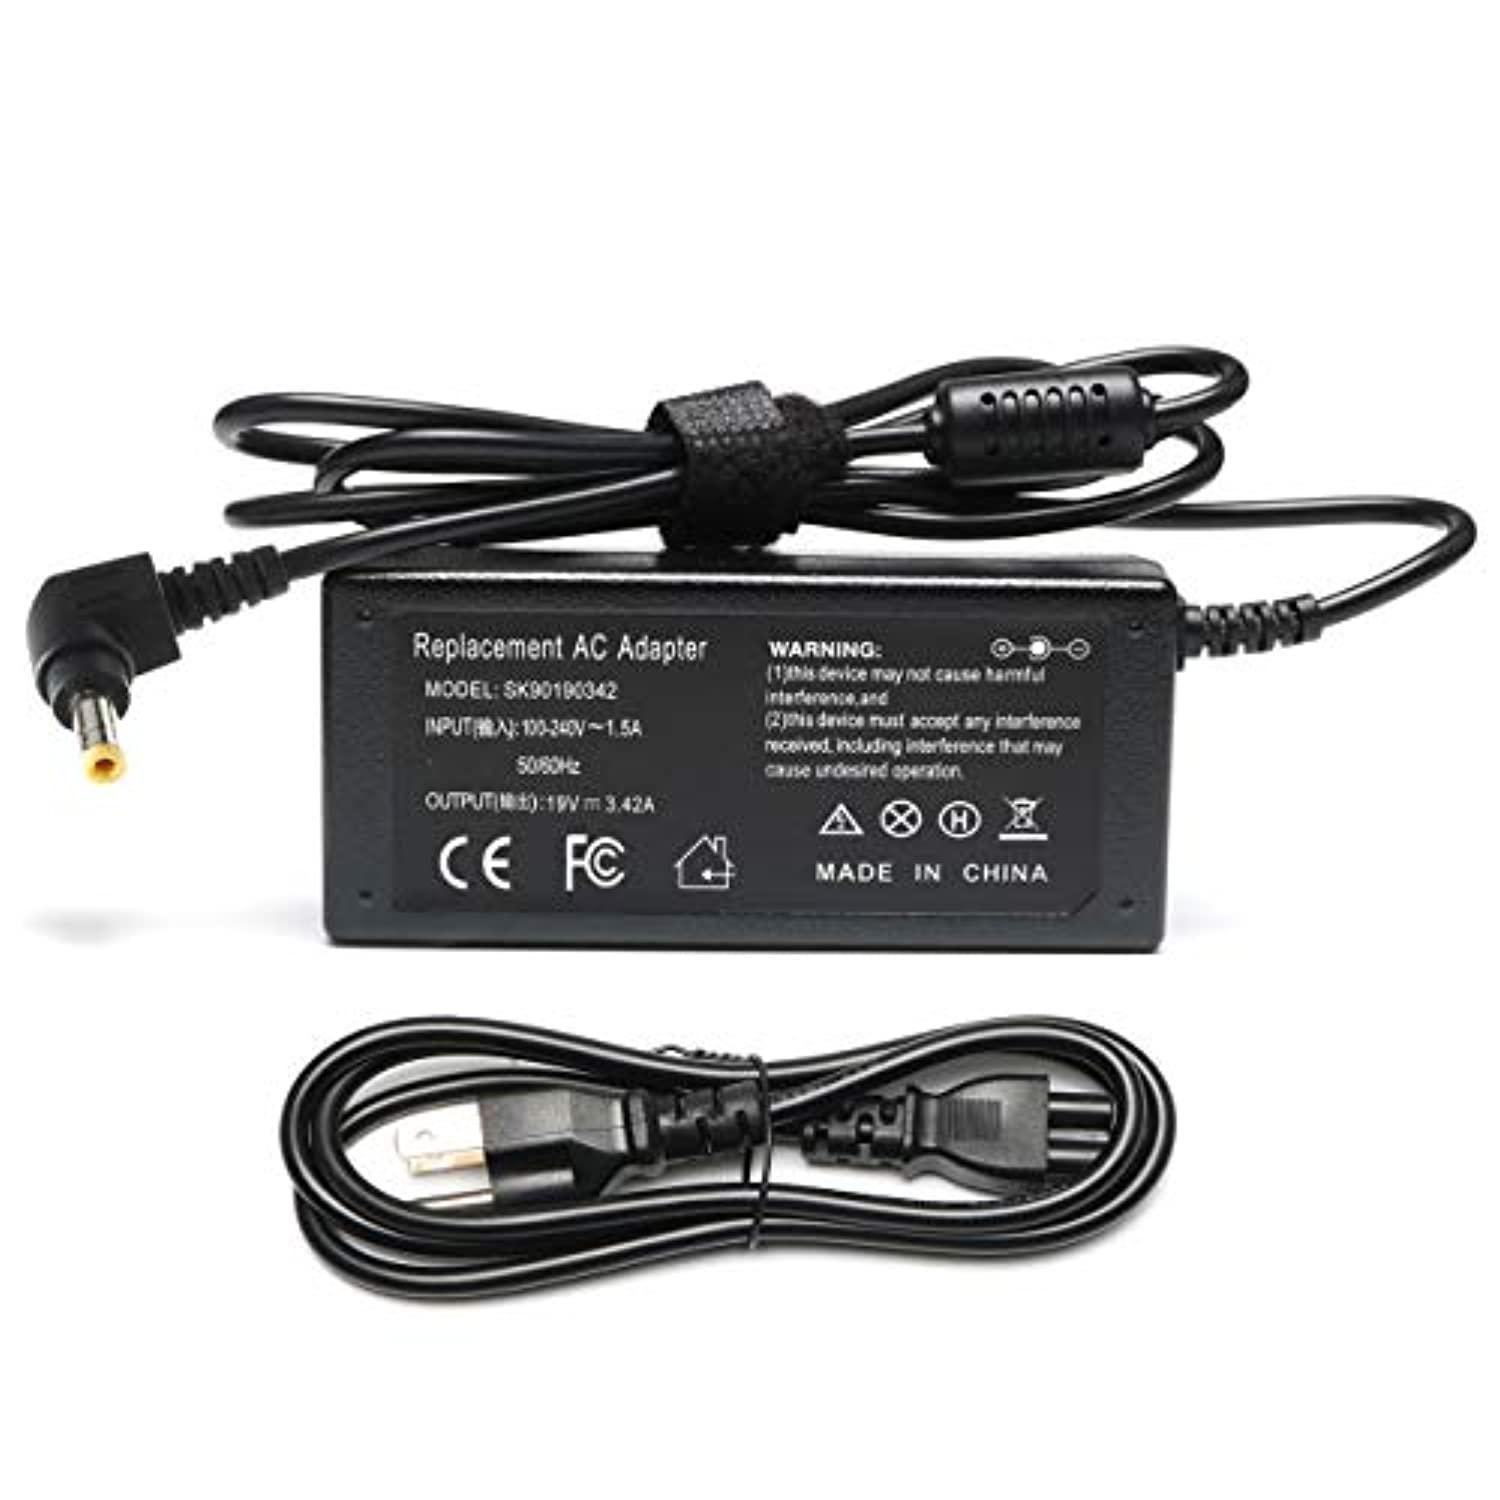 Tinkon 65w laptop charger for asus laptop power cord, asus notebook pc charger replacement asus x54c x551 x551m x555l x555la x501 x5